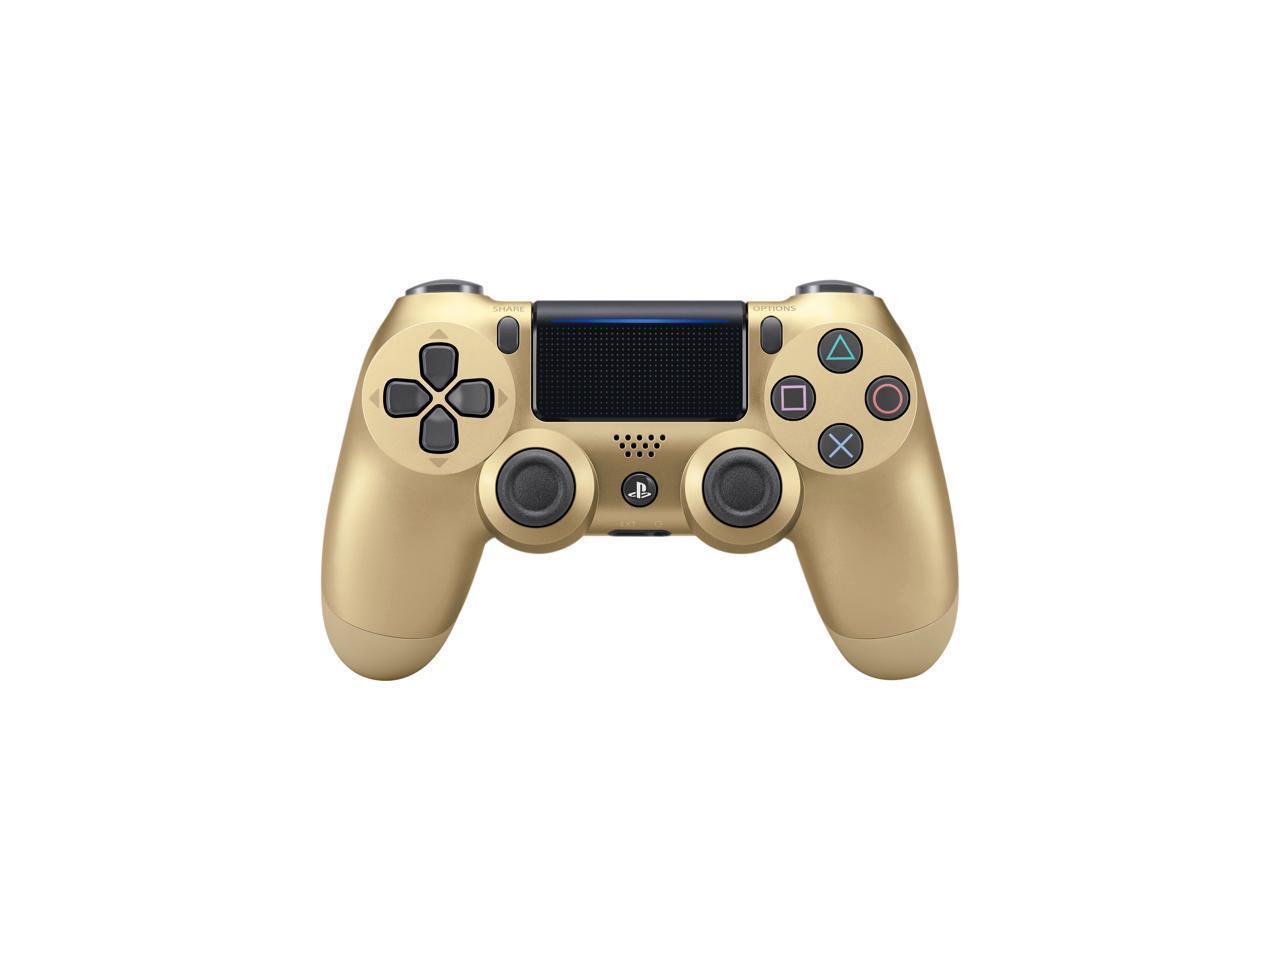 OEM DualShock 4 Wireless Controller for Sony PlayStation 4 - Gold (CUH-ZCT2)